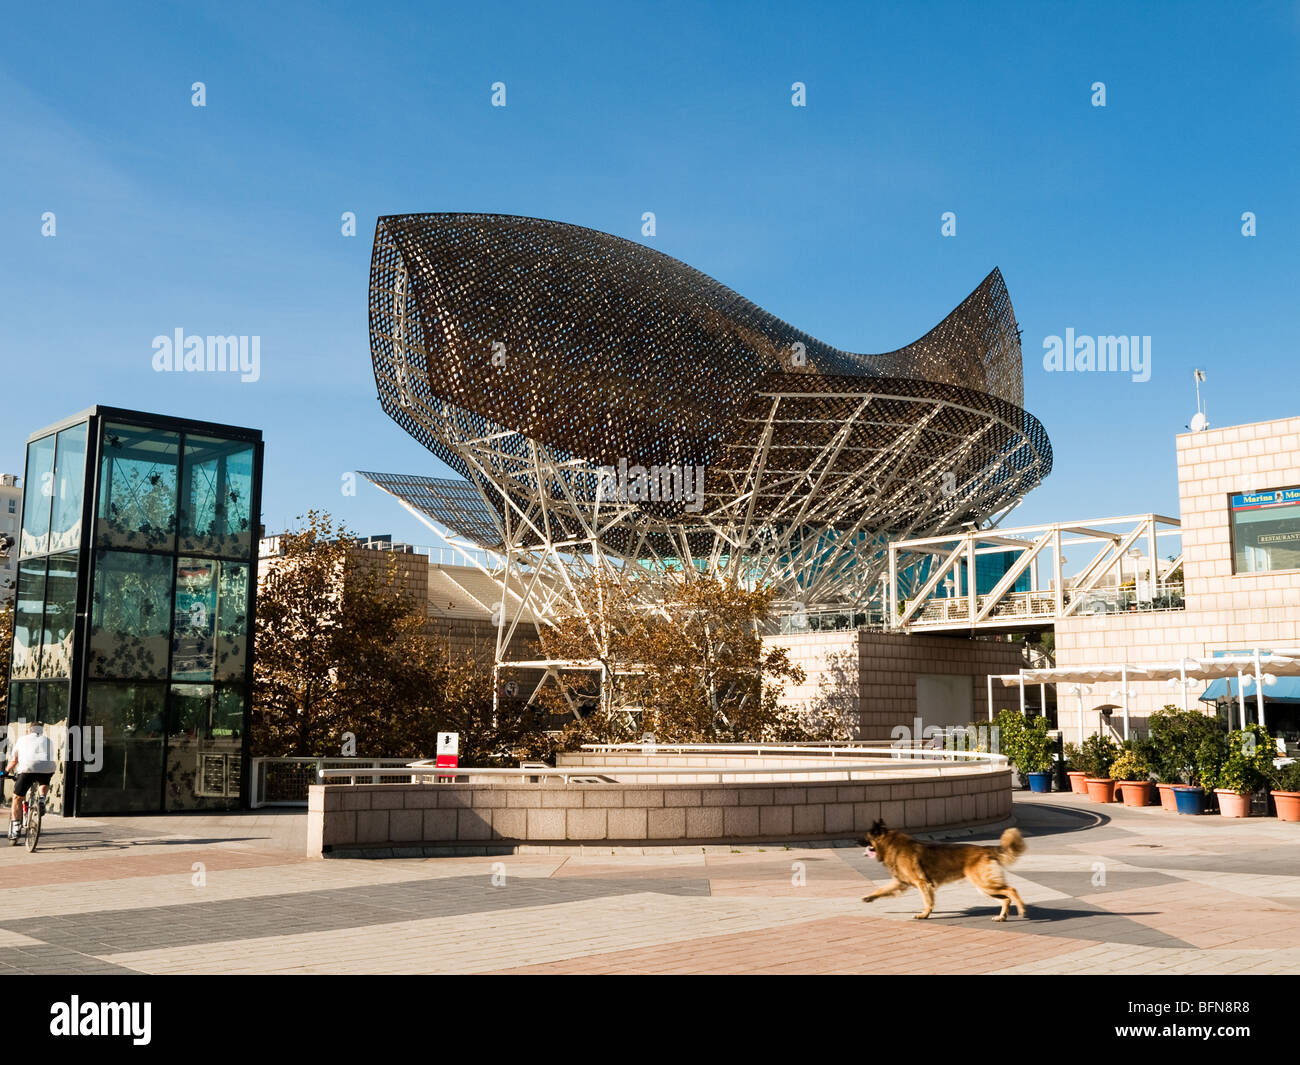 Peix Ballena  /Fish/ sculpture by Frank Gehry in Barcelona Port Olympic Stock Photo